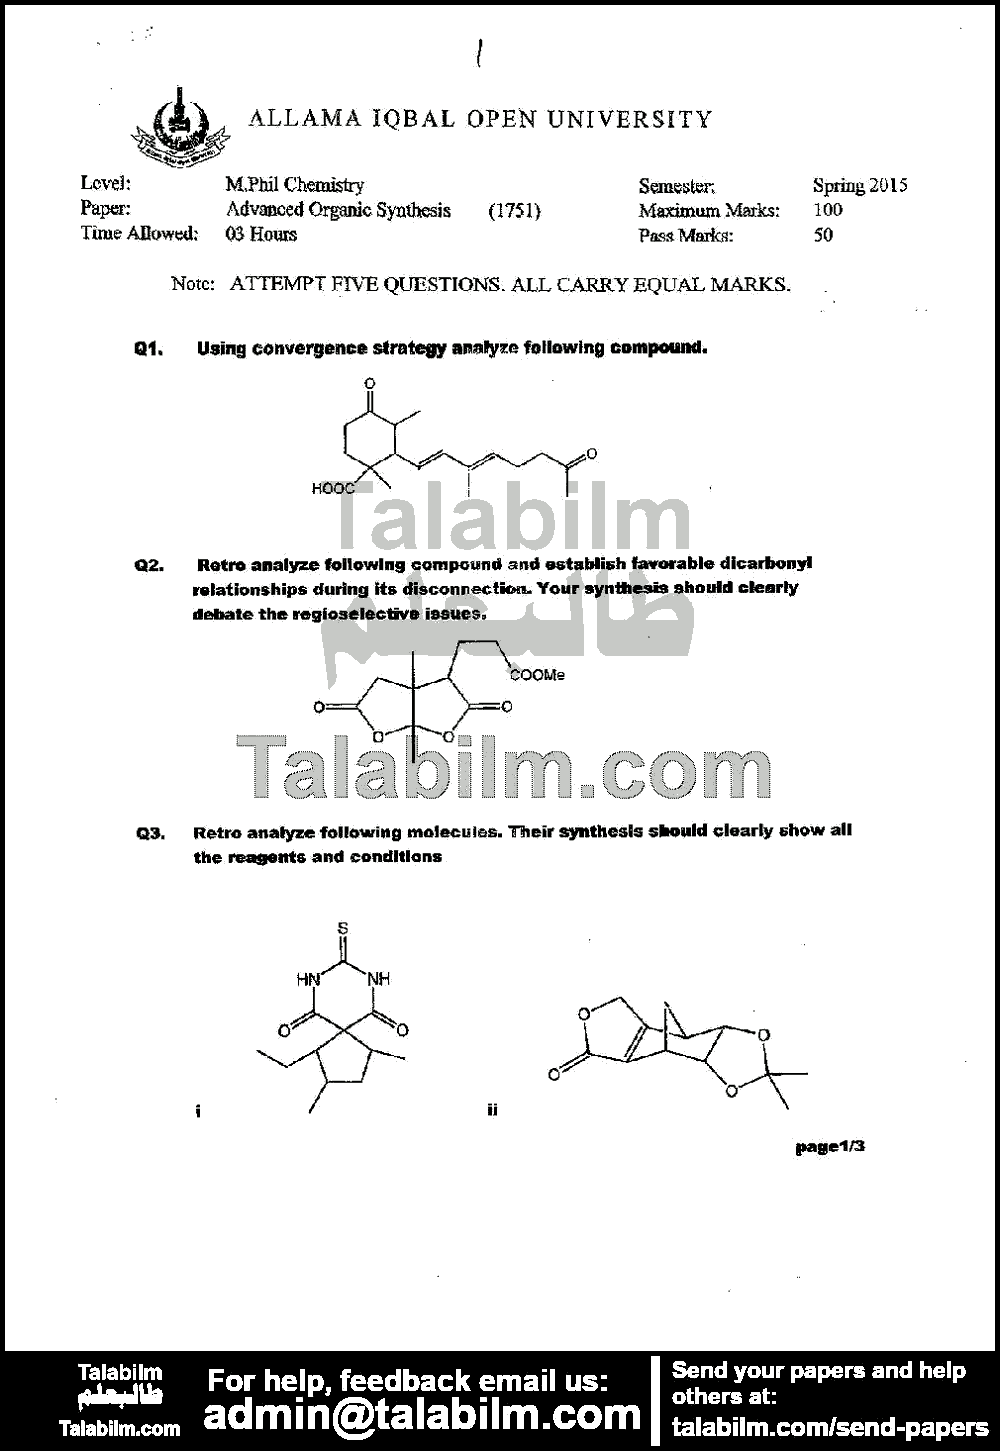 Advanced Organic Synthesis 1751 past paper for Spring 2015